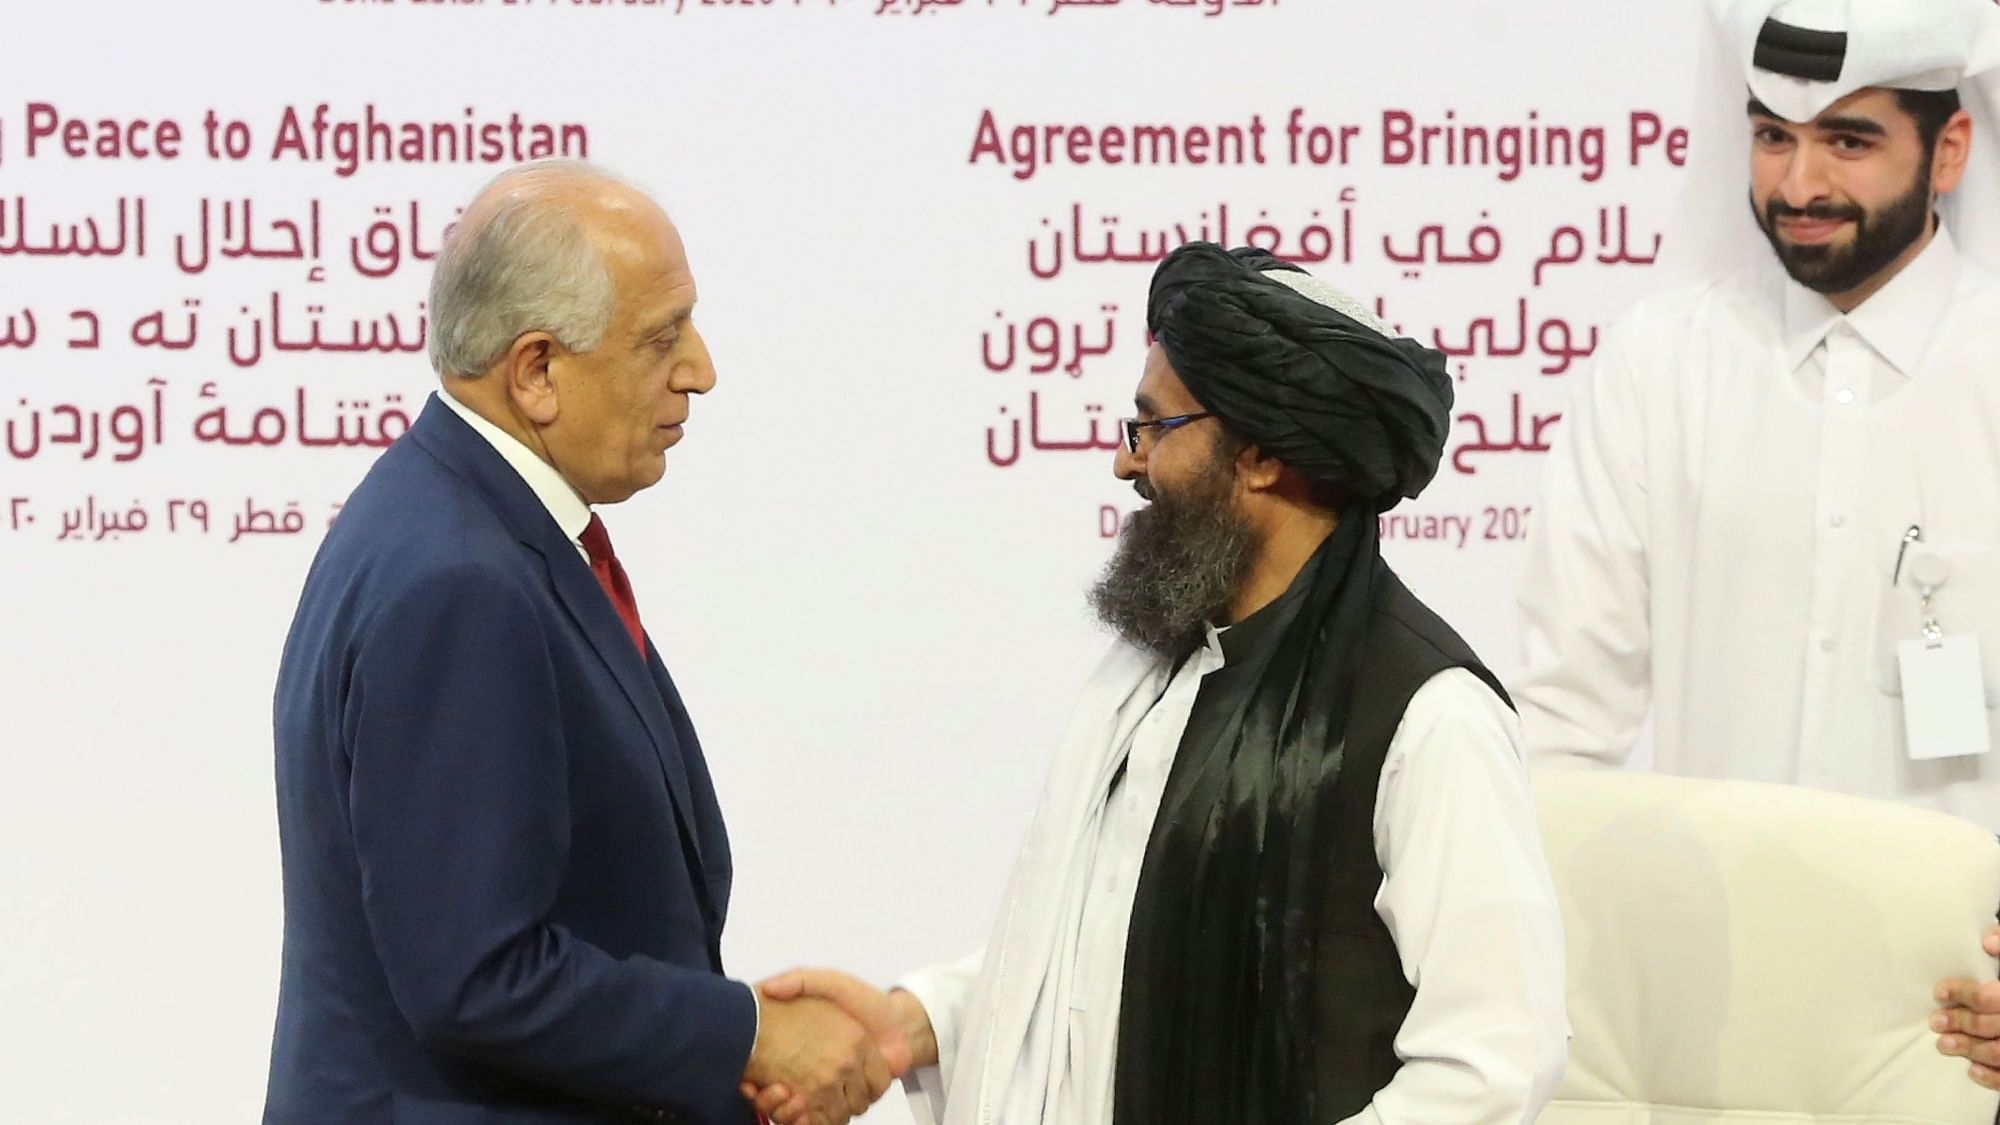 US peace envoy Zalmay Khalilzad, left, and Mullah Abdul Ghani Baradar, the Taliban group’s top political leader shake hands after signing a peace agreement between Taliban and US officials in Doha, Qatar, on 29 February.